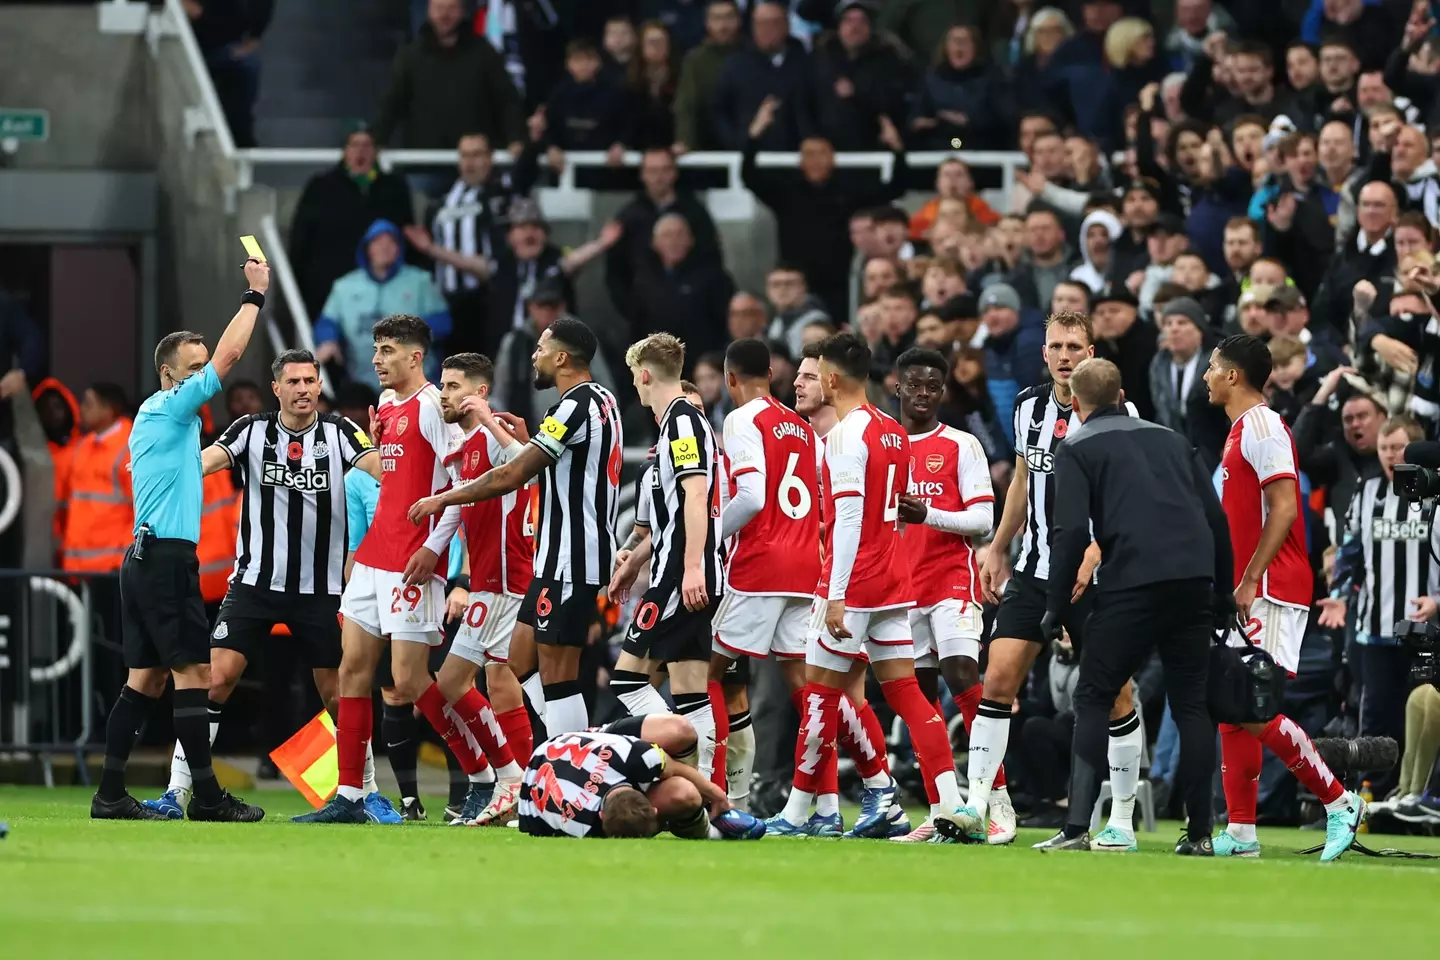 Arsenal's Kai Havertz is shown a yellow card against Newcastle United. (Credit:Getty)